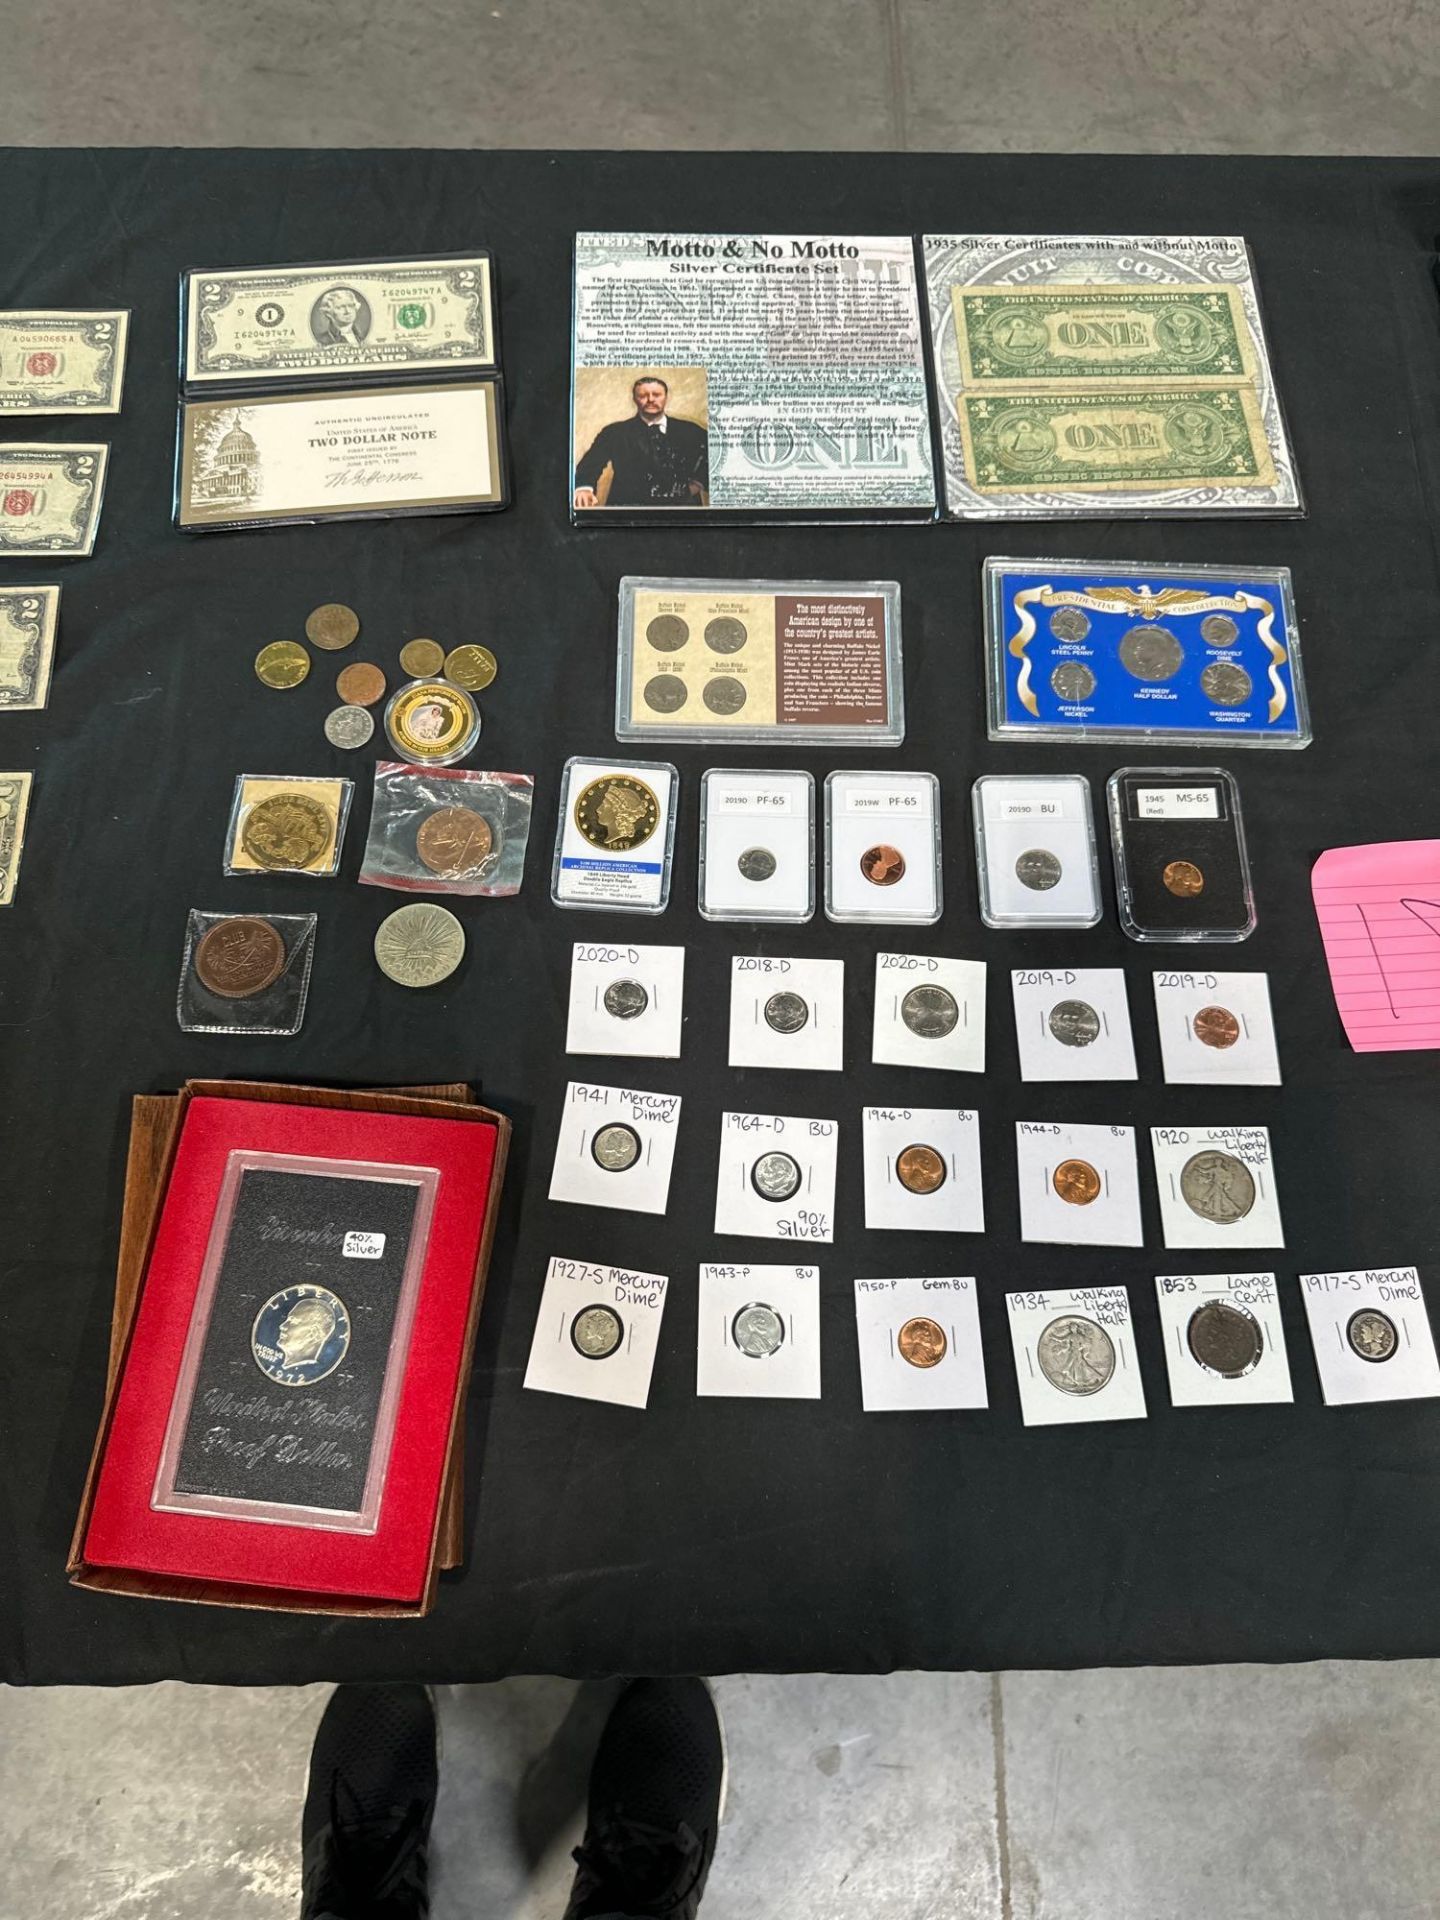 Misc coins and Currency Silver Certificate, Mercury Dimes, Pennies, Proof sets, Funny back, start no - Image 3 of 12